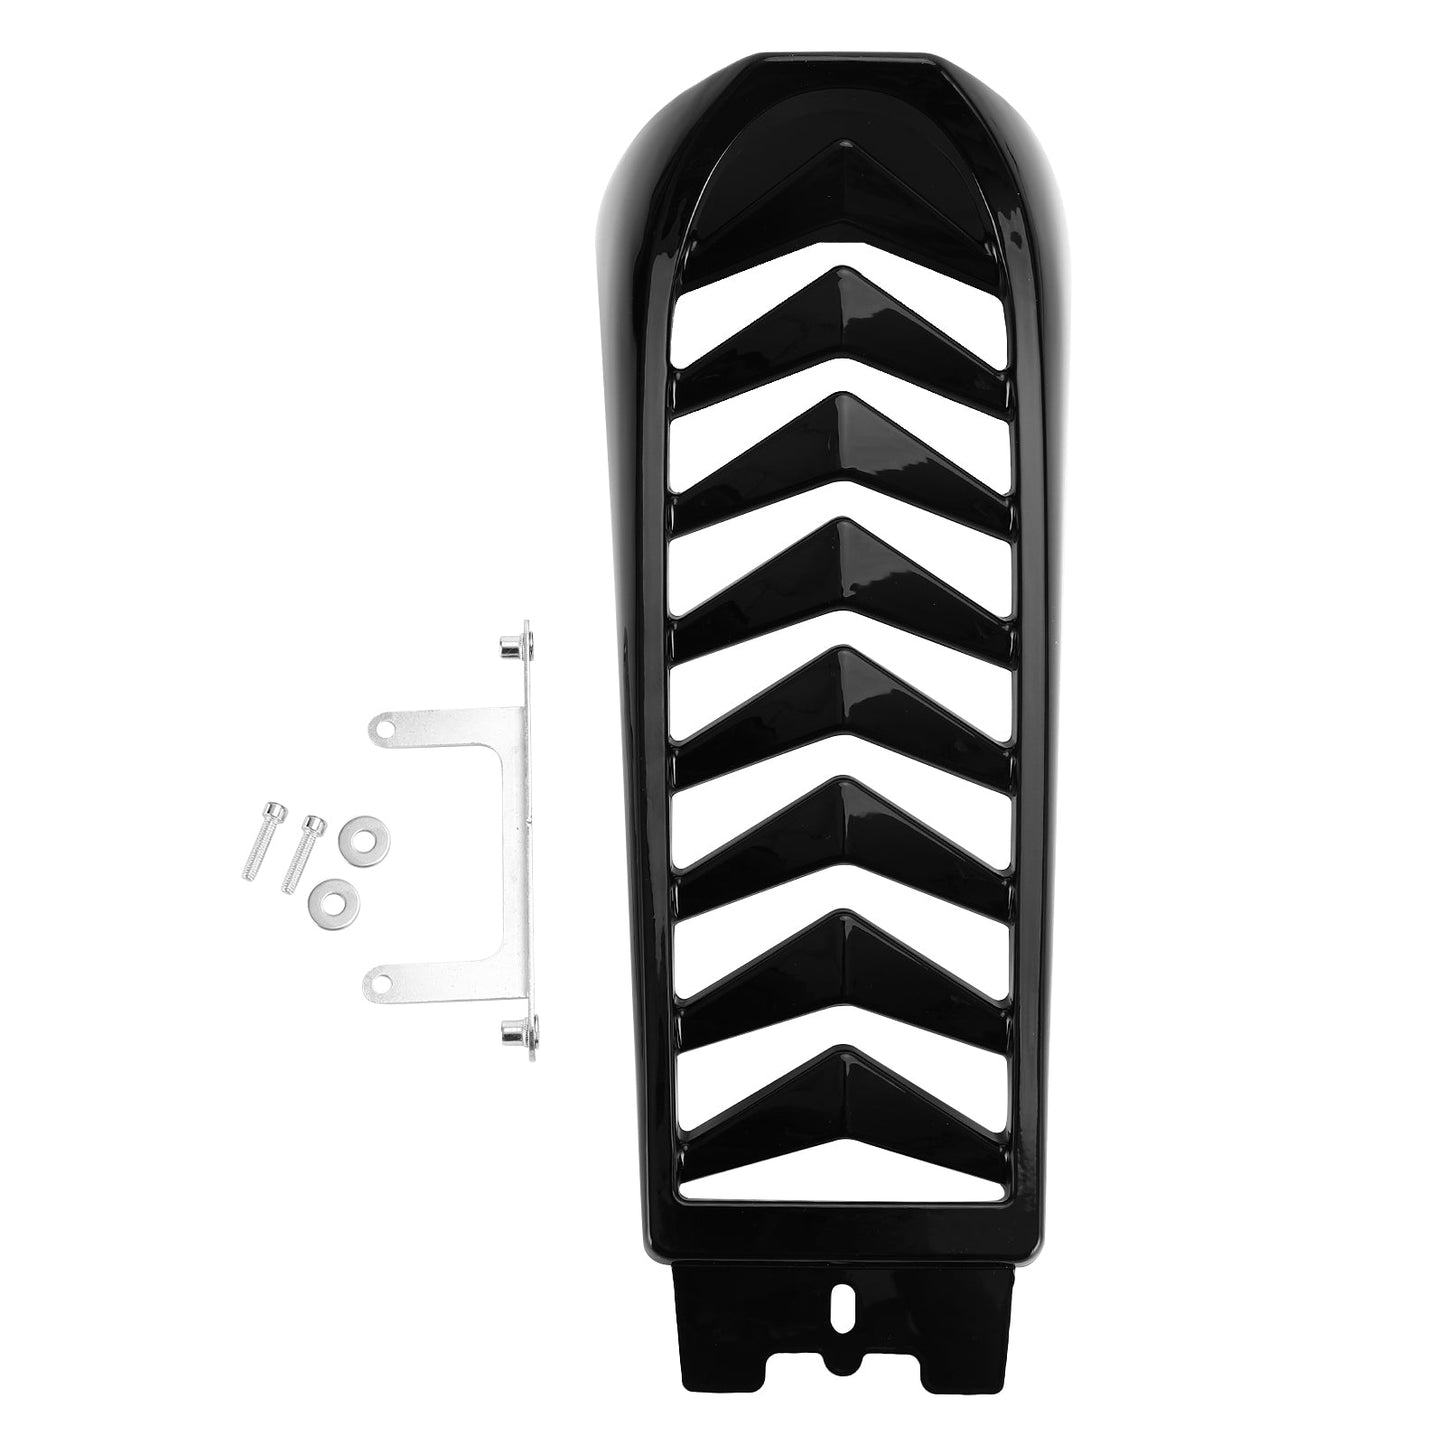 2018-2021 Softail Breakout Fat Bob Front Chin Spoiler Lower Radiator Cover